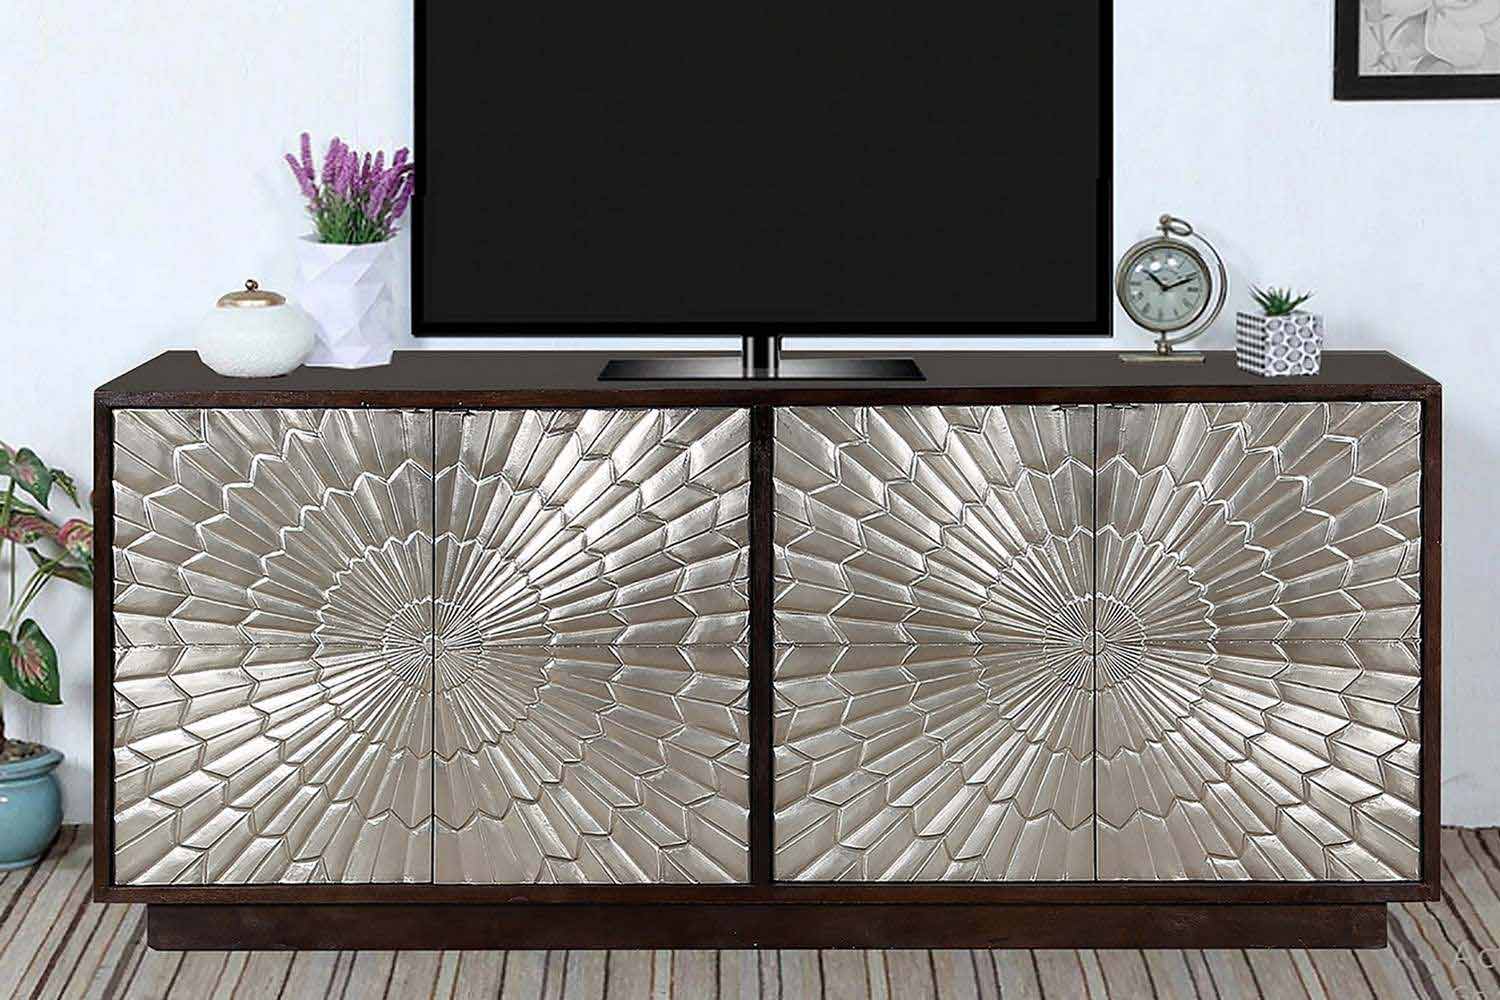 Parker House Crossings Palace 78 Inch TV Console - Sliver Clad